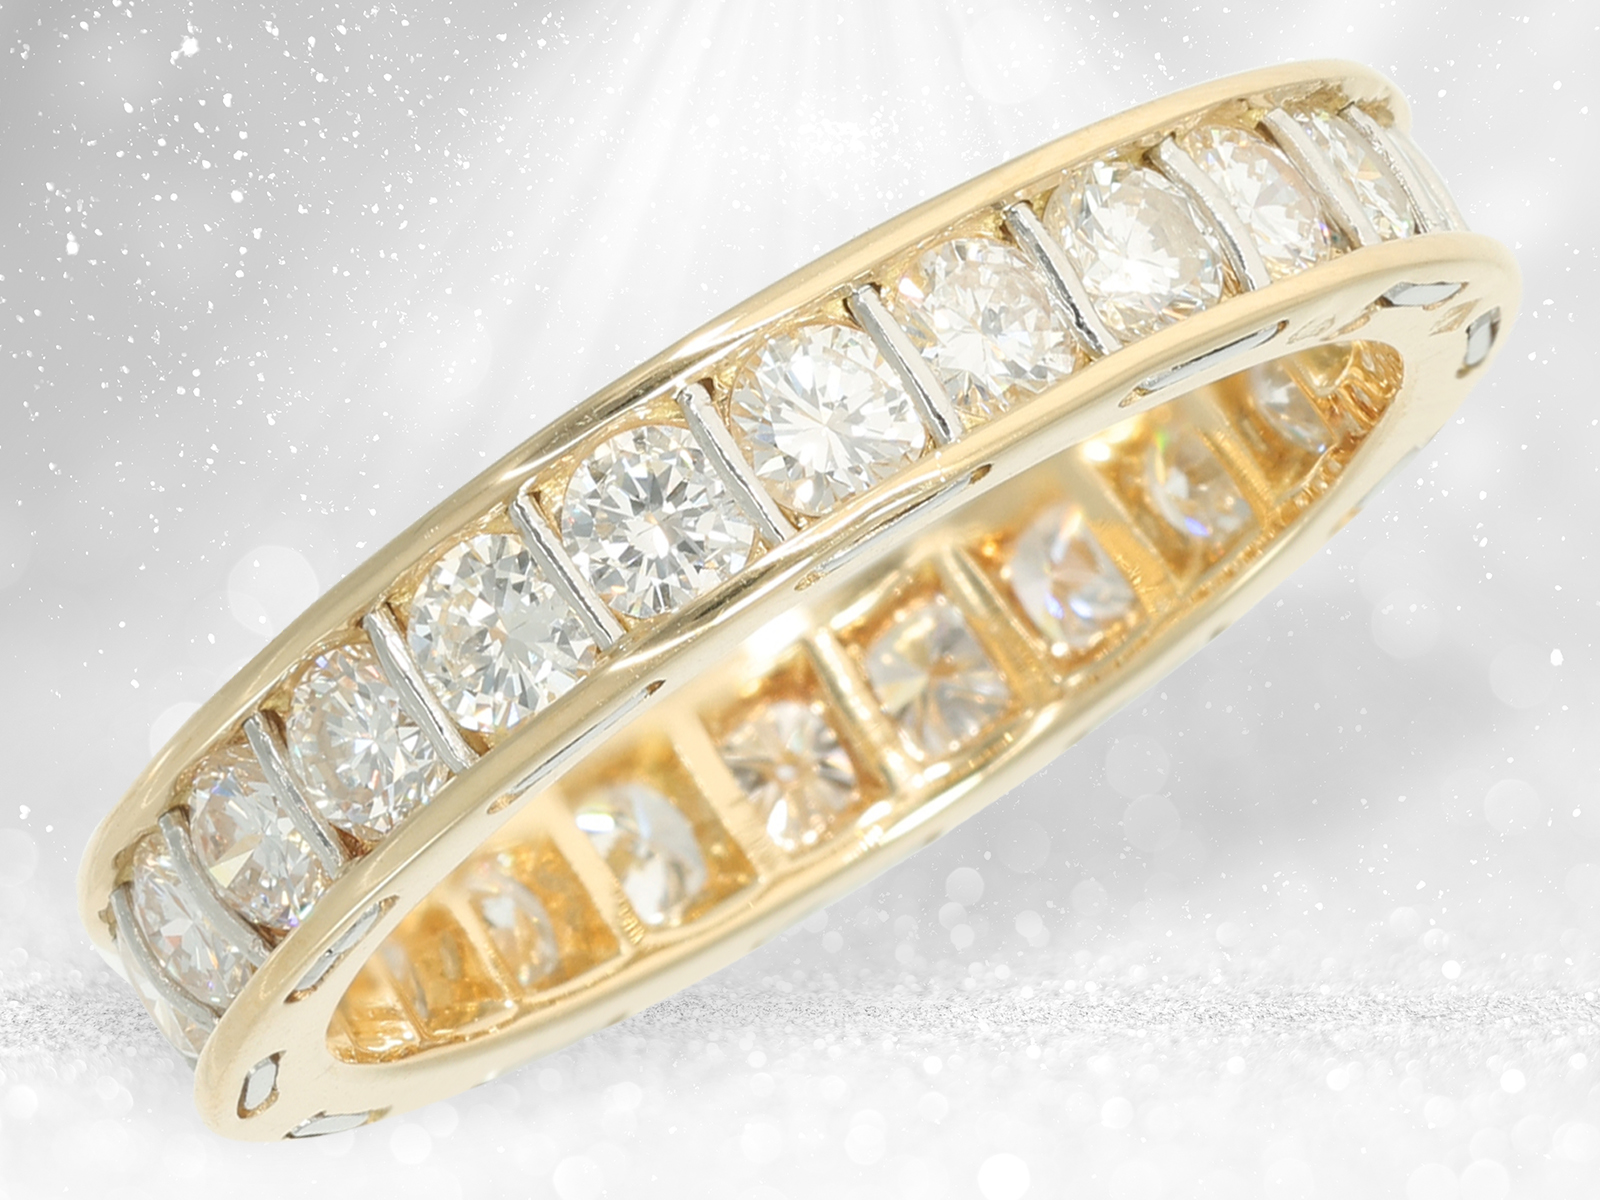 Luxurious vintage memory ring by Cartier, finest brilliant-cut diamonds of approx. 1.92ct, with box - Image 2 of 6